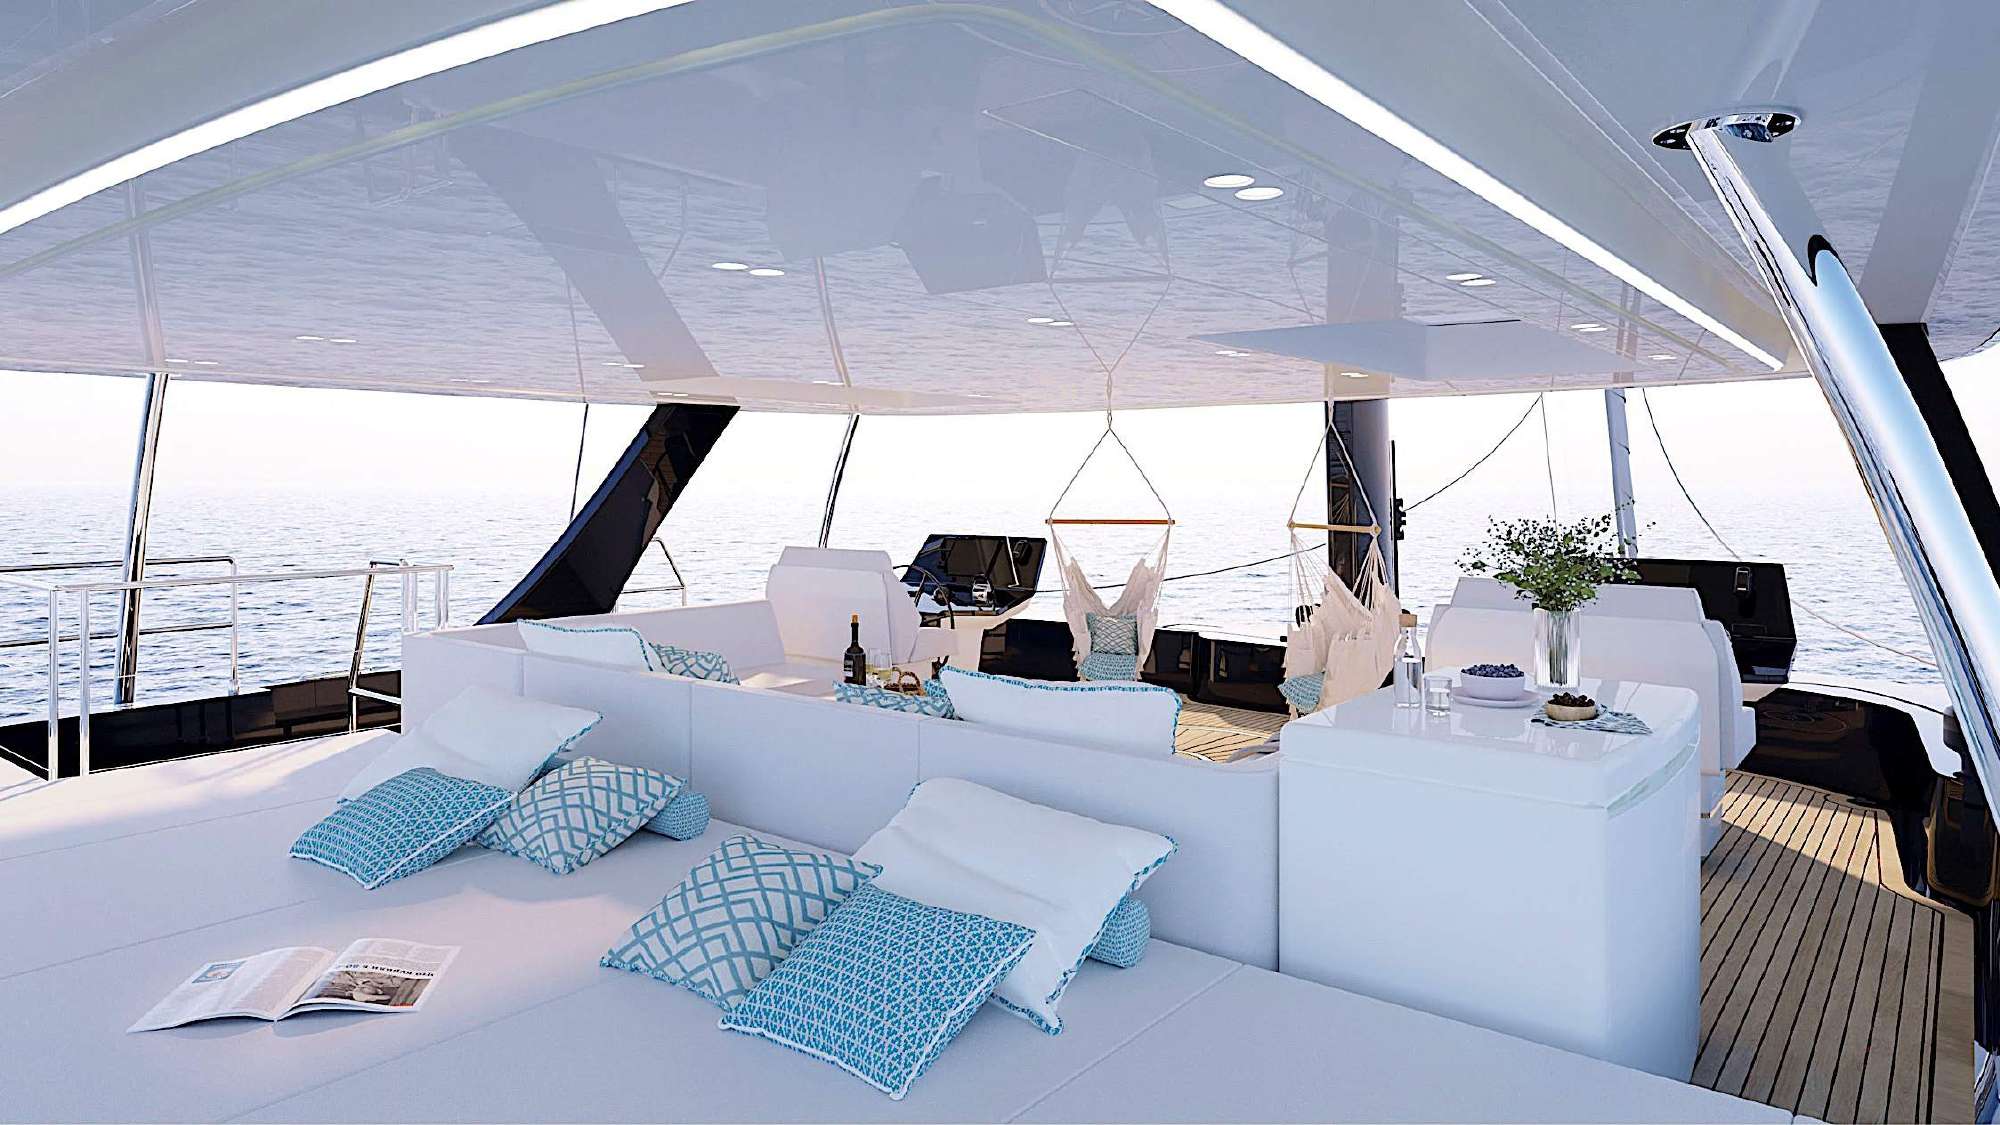 ONE PLANET - Catamaran Charter The Canaries & Boat hire in W. Med -Naples/Sicily, W. Med -Riviera/Cors/Sard., Caribbean Leewards, Caribbean Windwards, Turkey, W. Med - Spain/Balearics, Caribbean Leewards, Caribbean Windwards 6